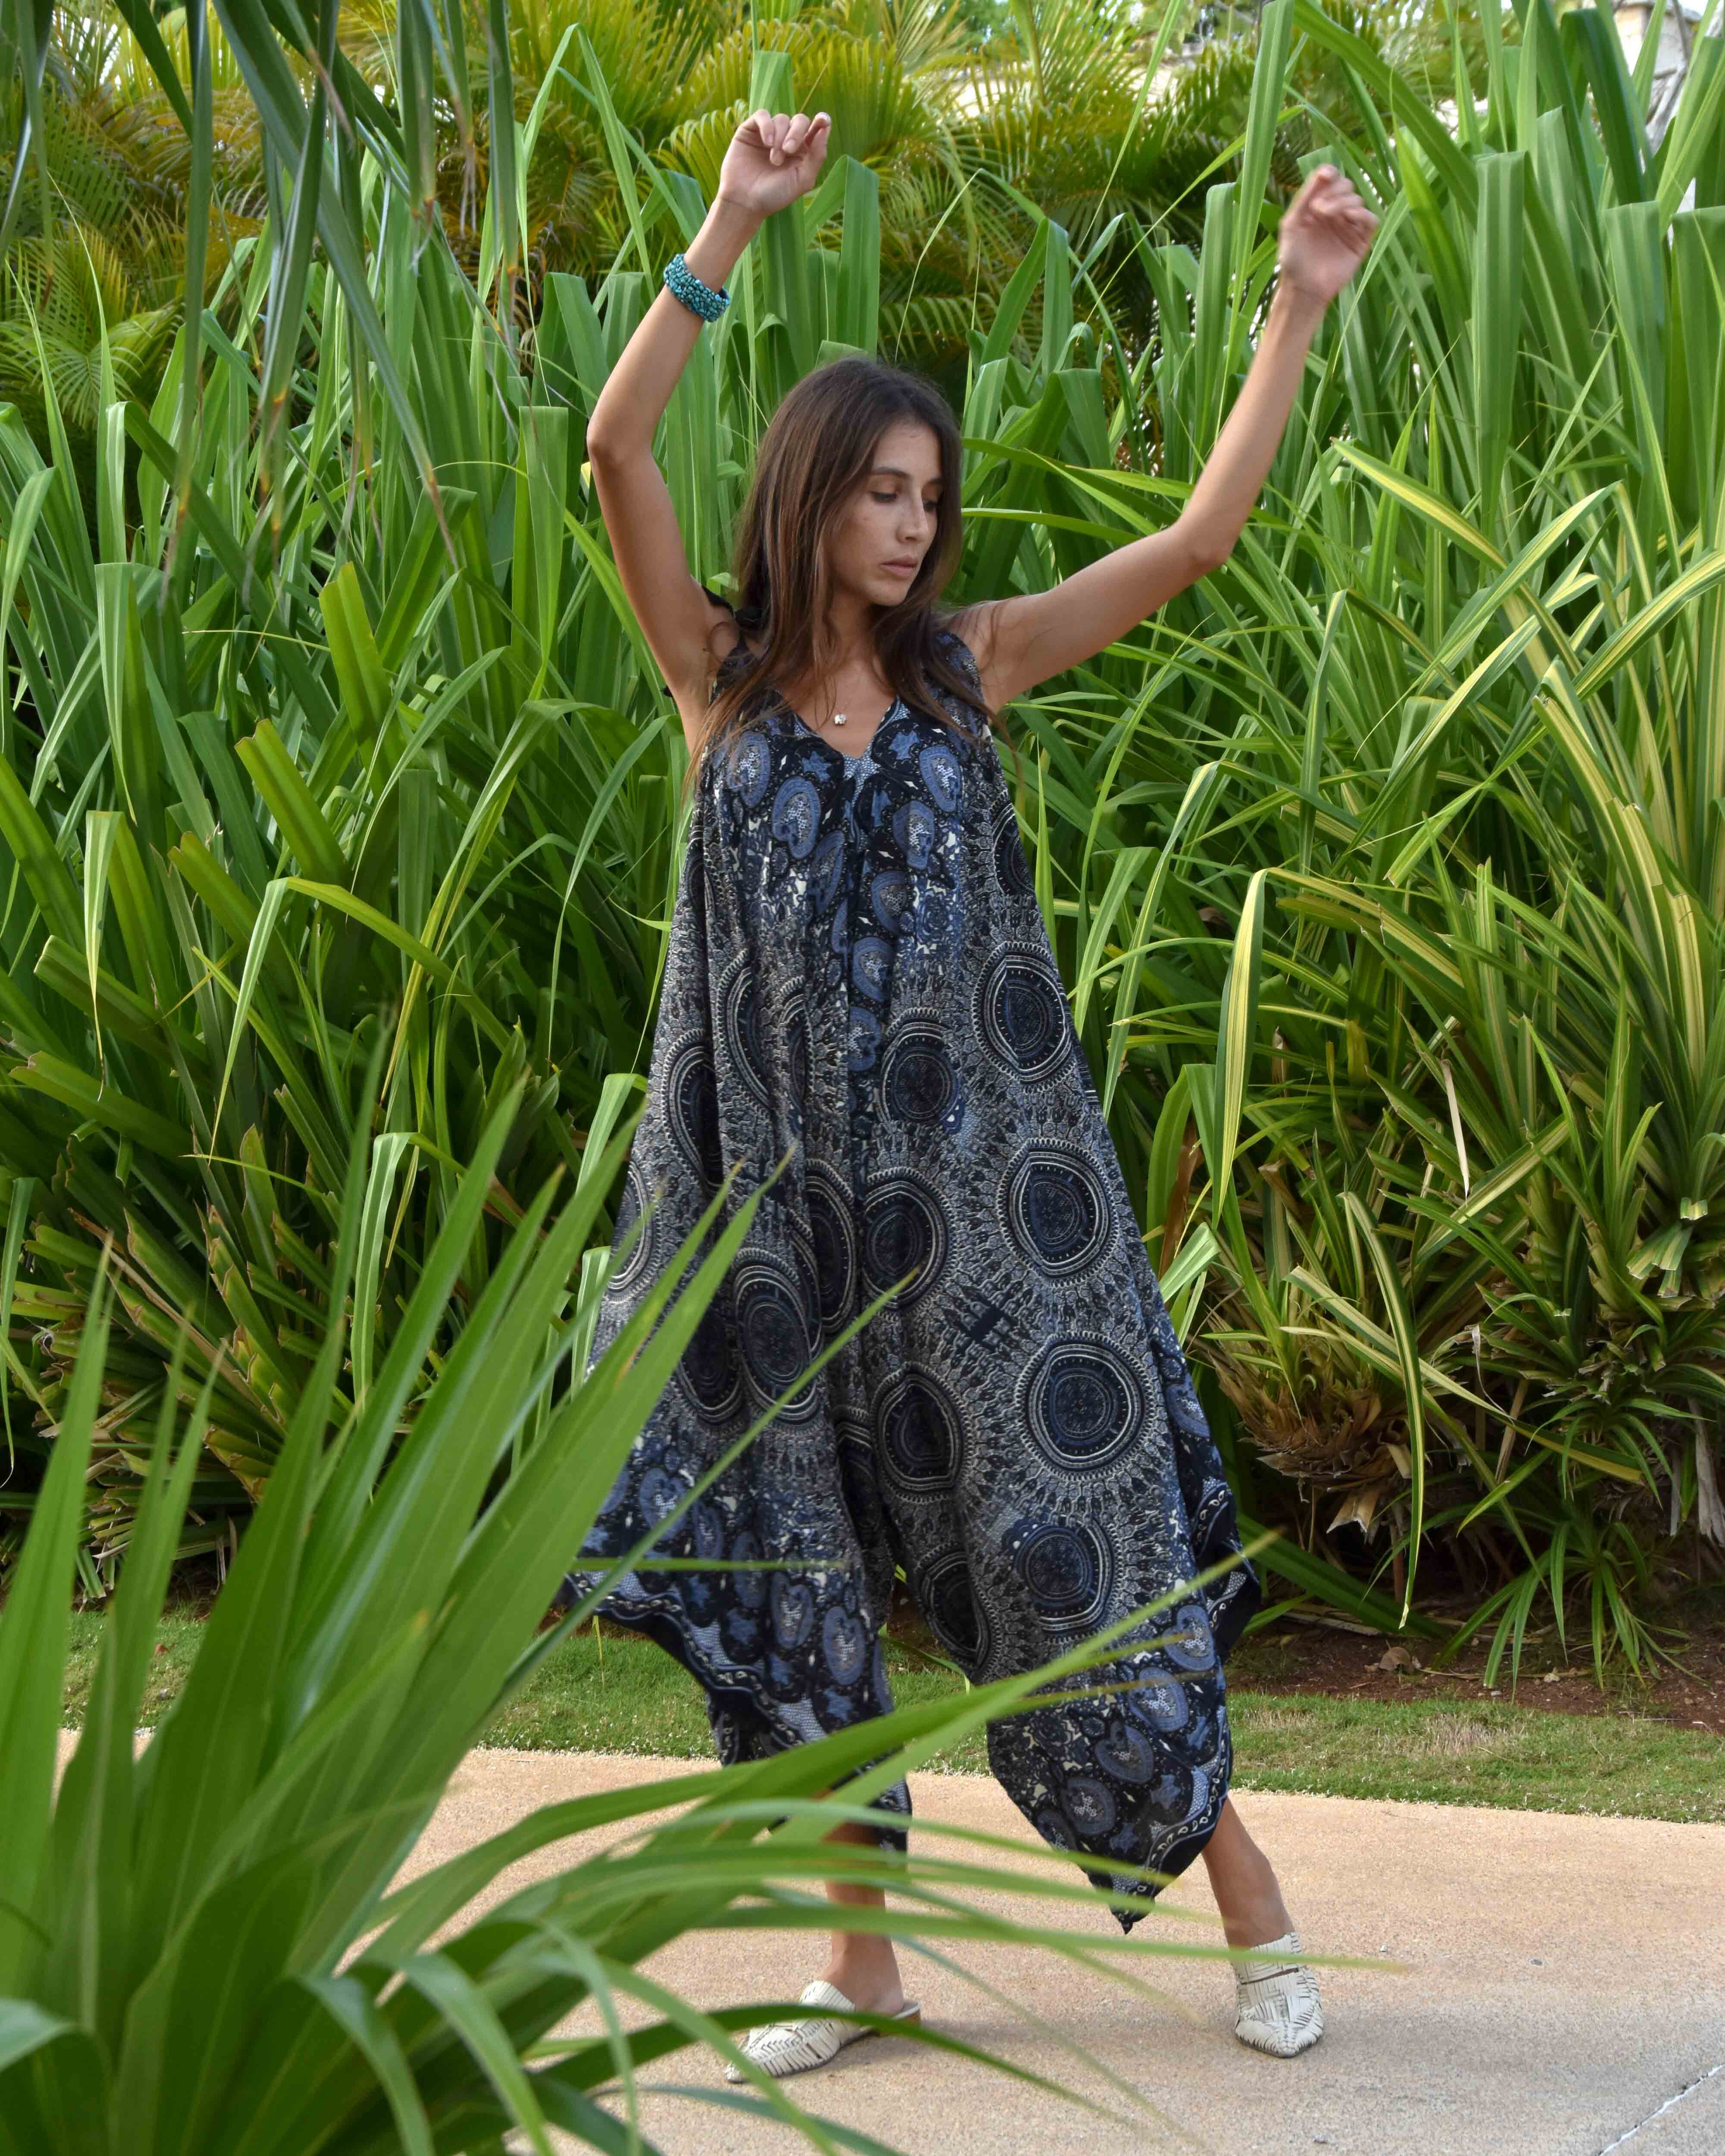 TULUM JUMPSUIT DRESS Elepanta Jumpsuits - Buy Today Elephant Pants Jewelry And Bohemian Clothes Handmade In Thailand Help To Save The Elephants FairTrade And Vegan